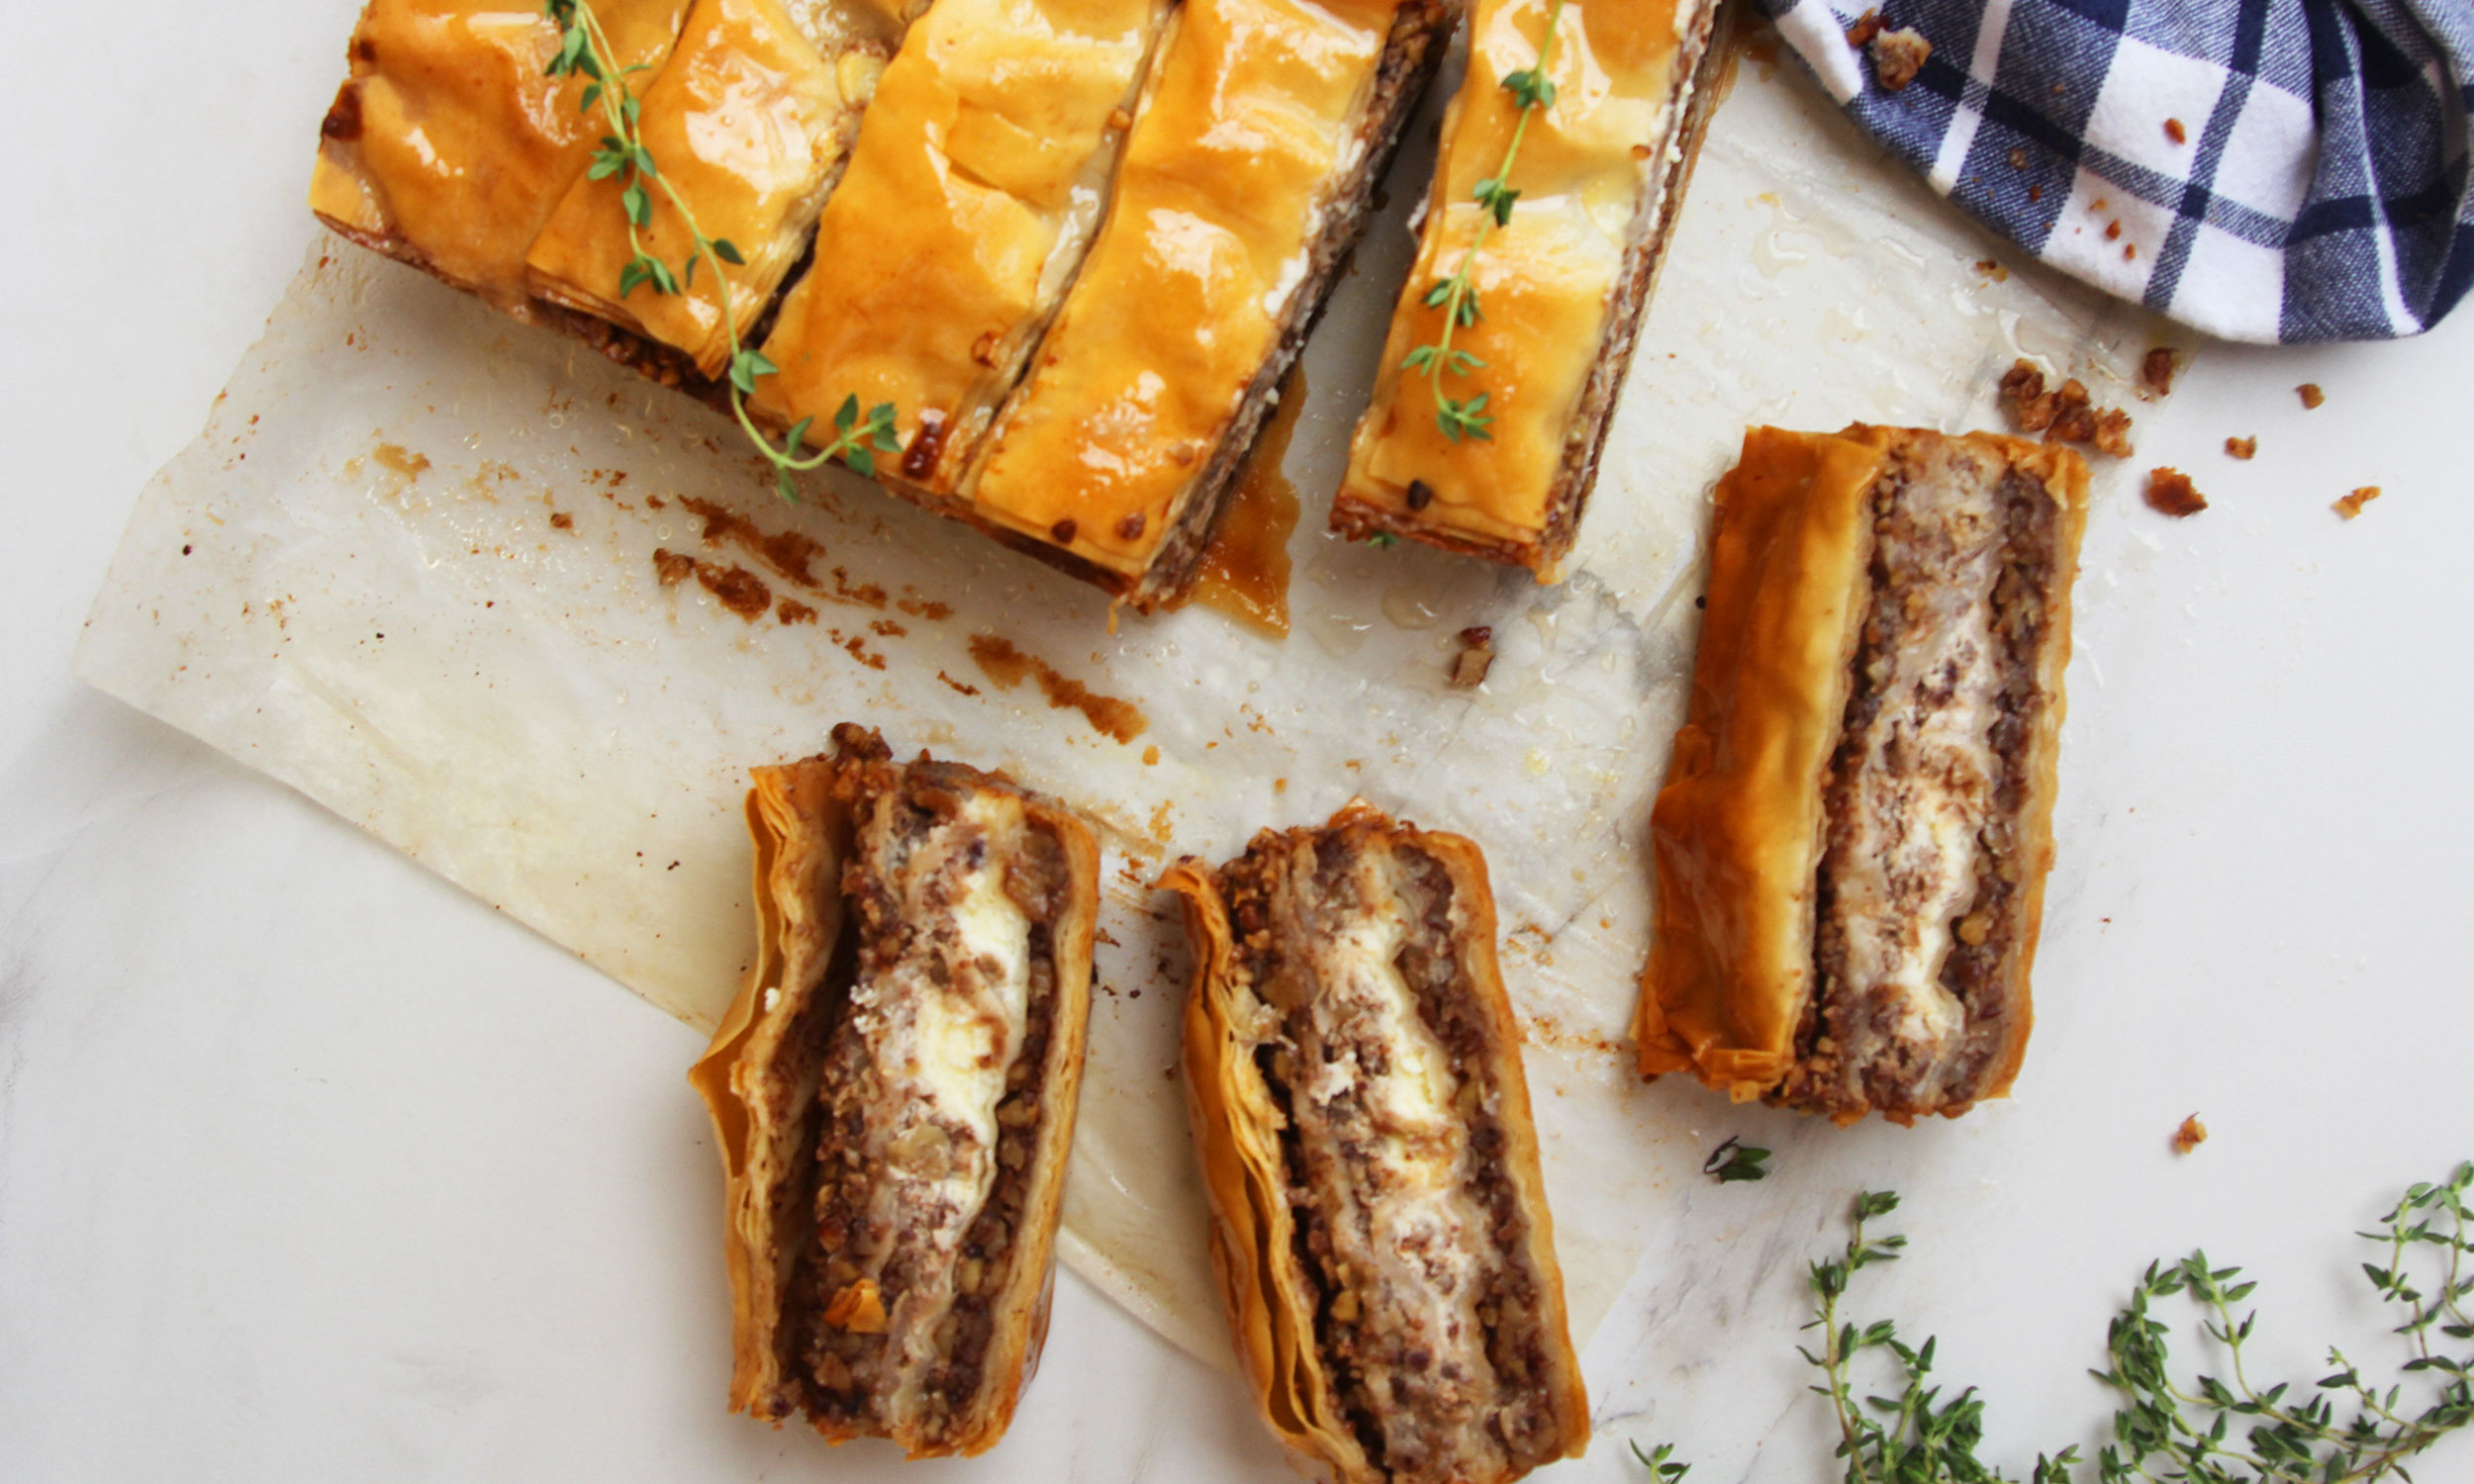 Pour Honey Thyme Syrup Over Your Cheesecake-Baklava Bars